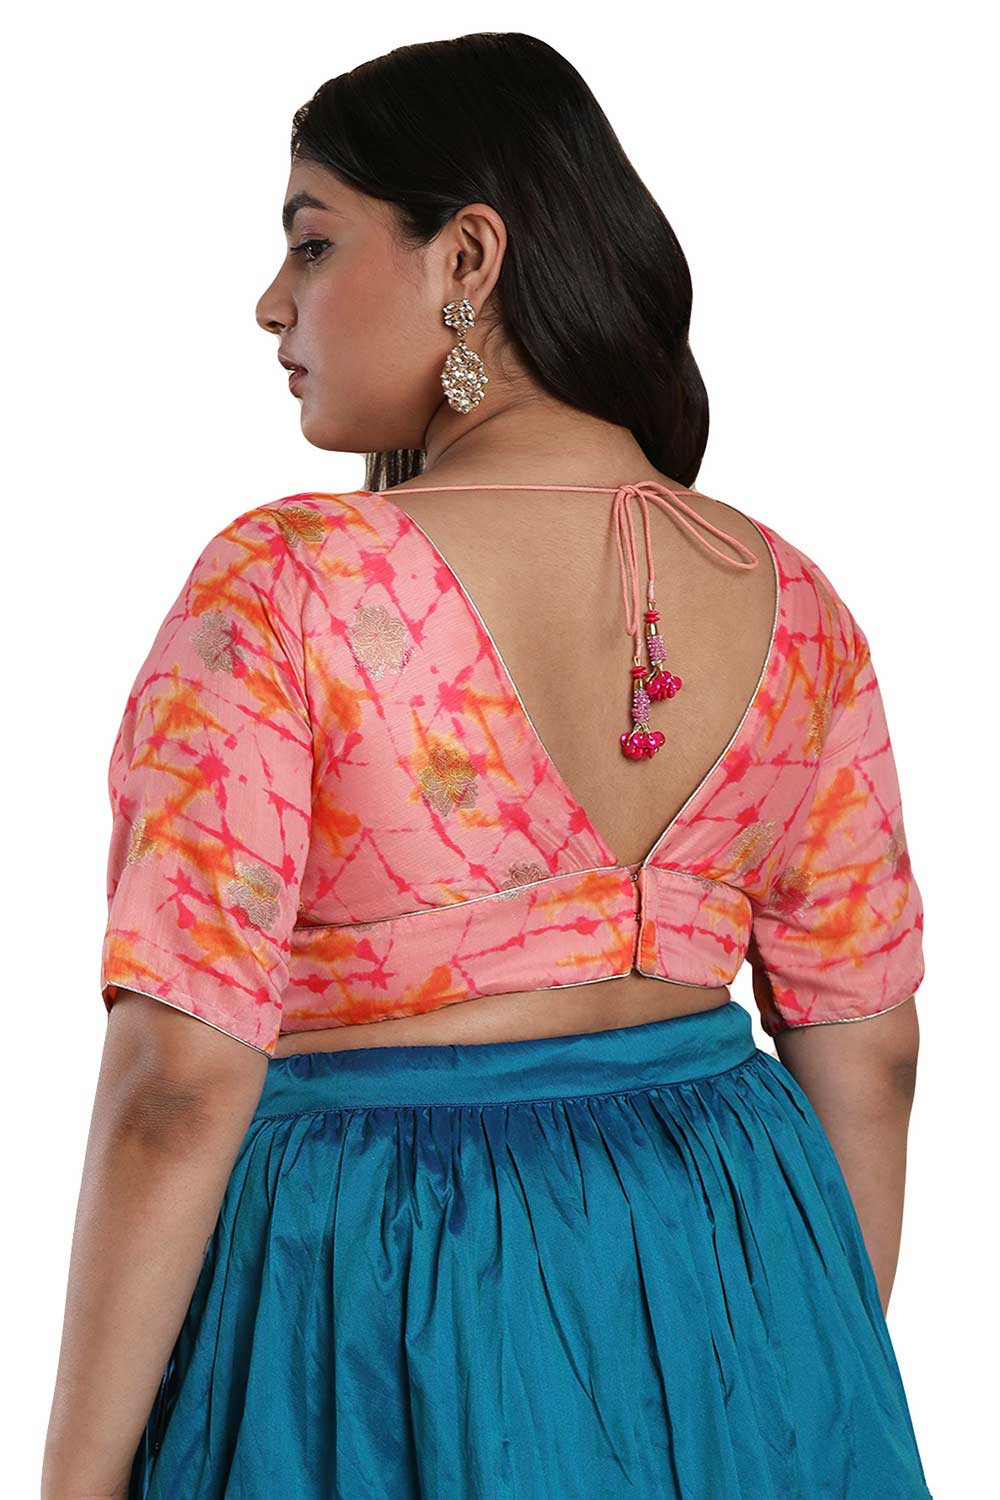 Buy Pink Brocade Readymade Saree Blouse Online - One Minute Sareee